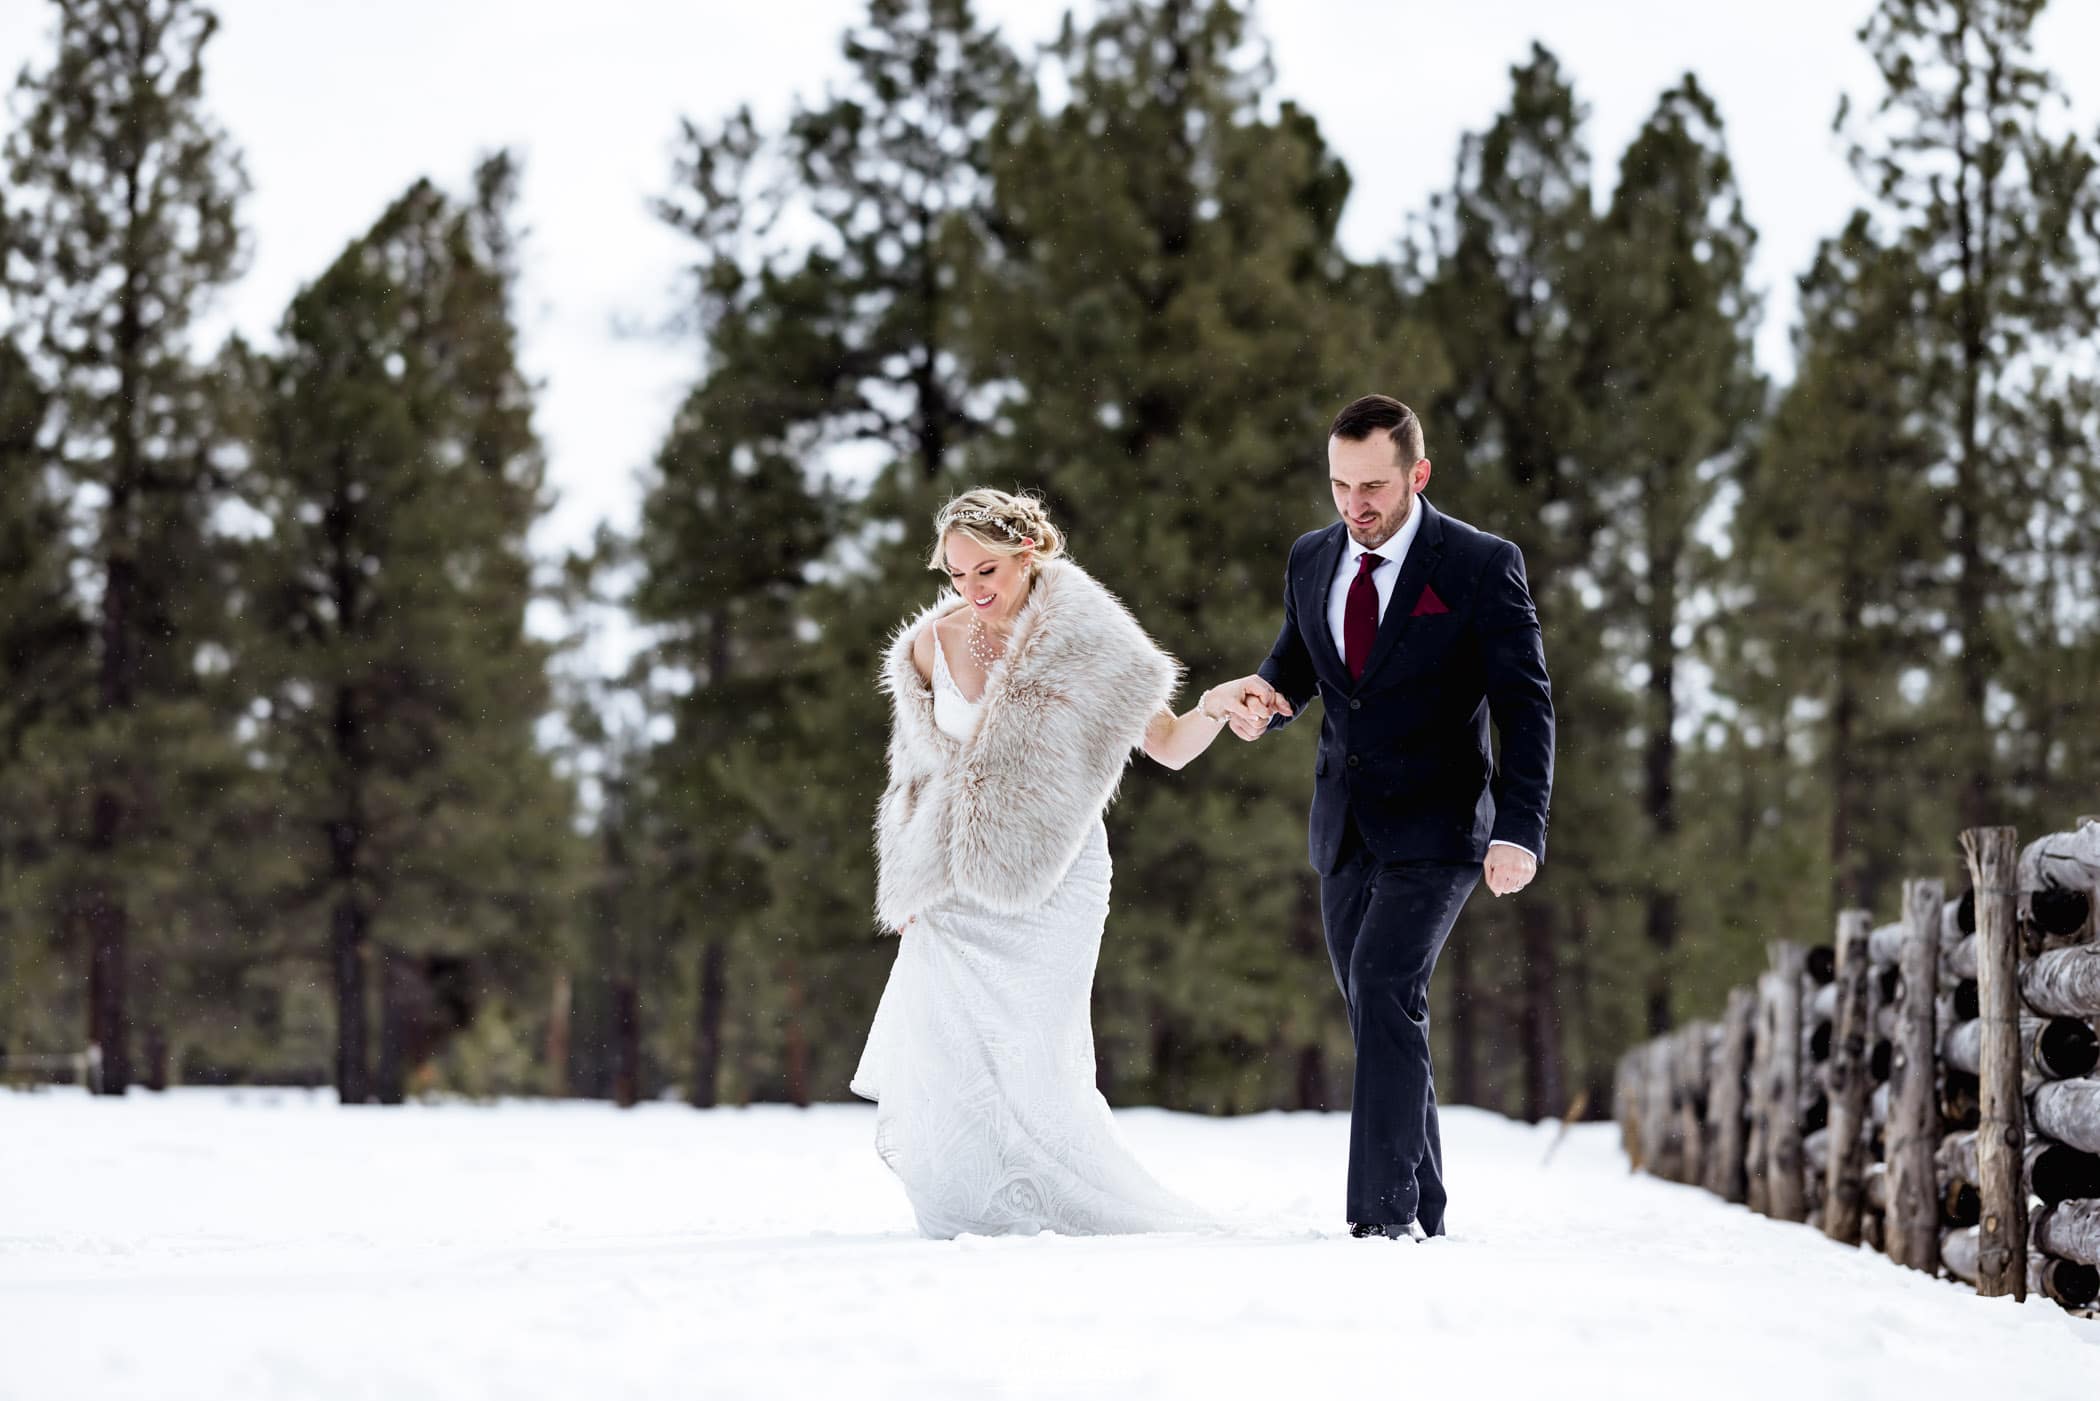 Bride and groom holding hands smiling in snow